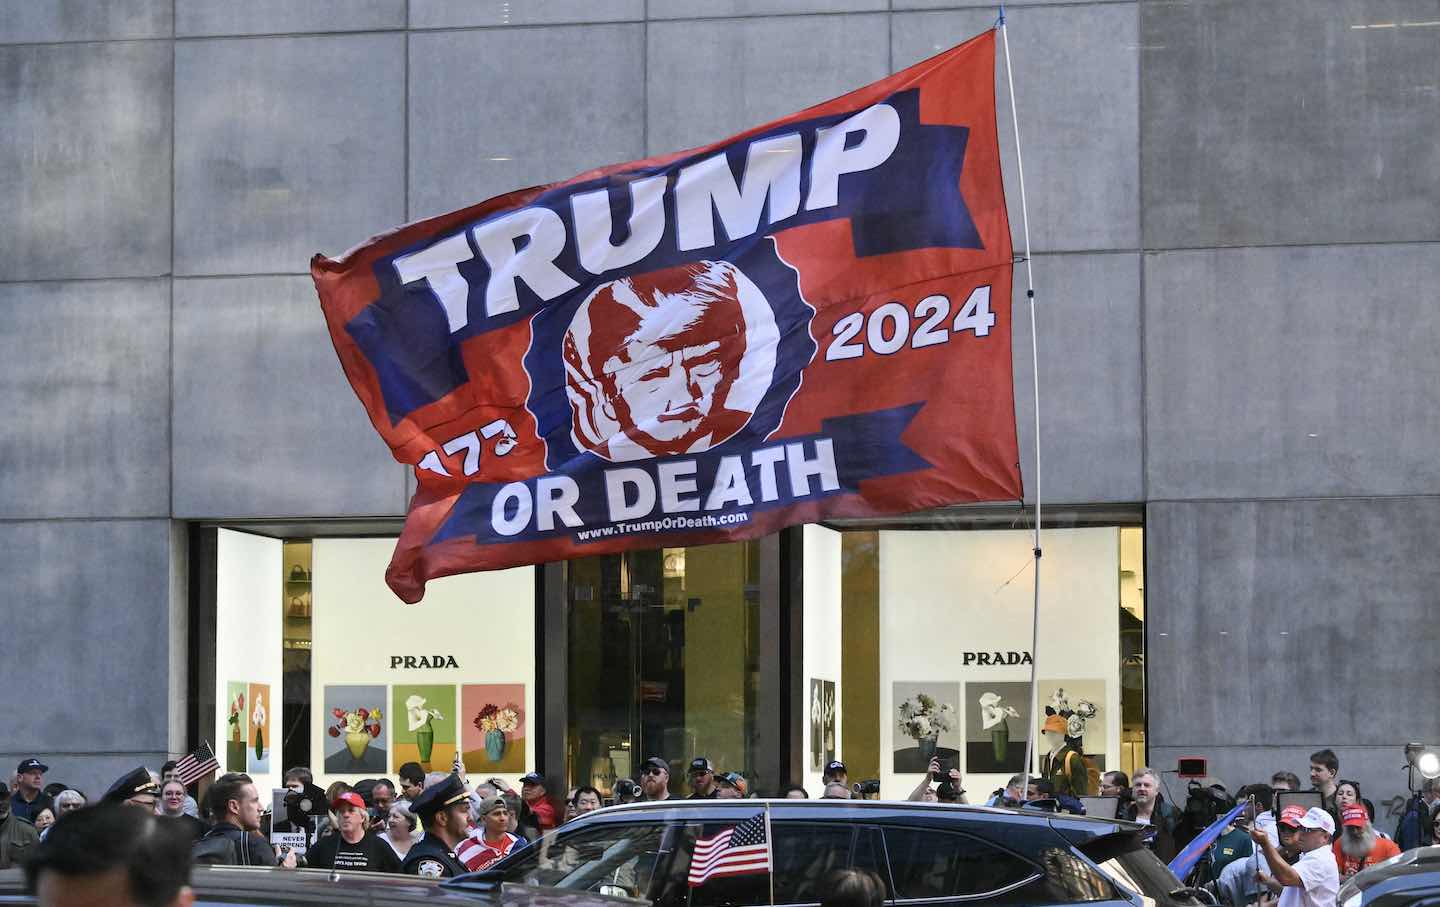 A Trump-themed flag is flown by supporters across the street from Trump Tower in New York City on May 31, 2024, before former US President and Republican presidential candidate Donald Trump holds a press conference following his felony conviction for falsifying business records.